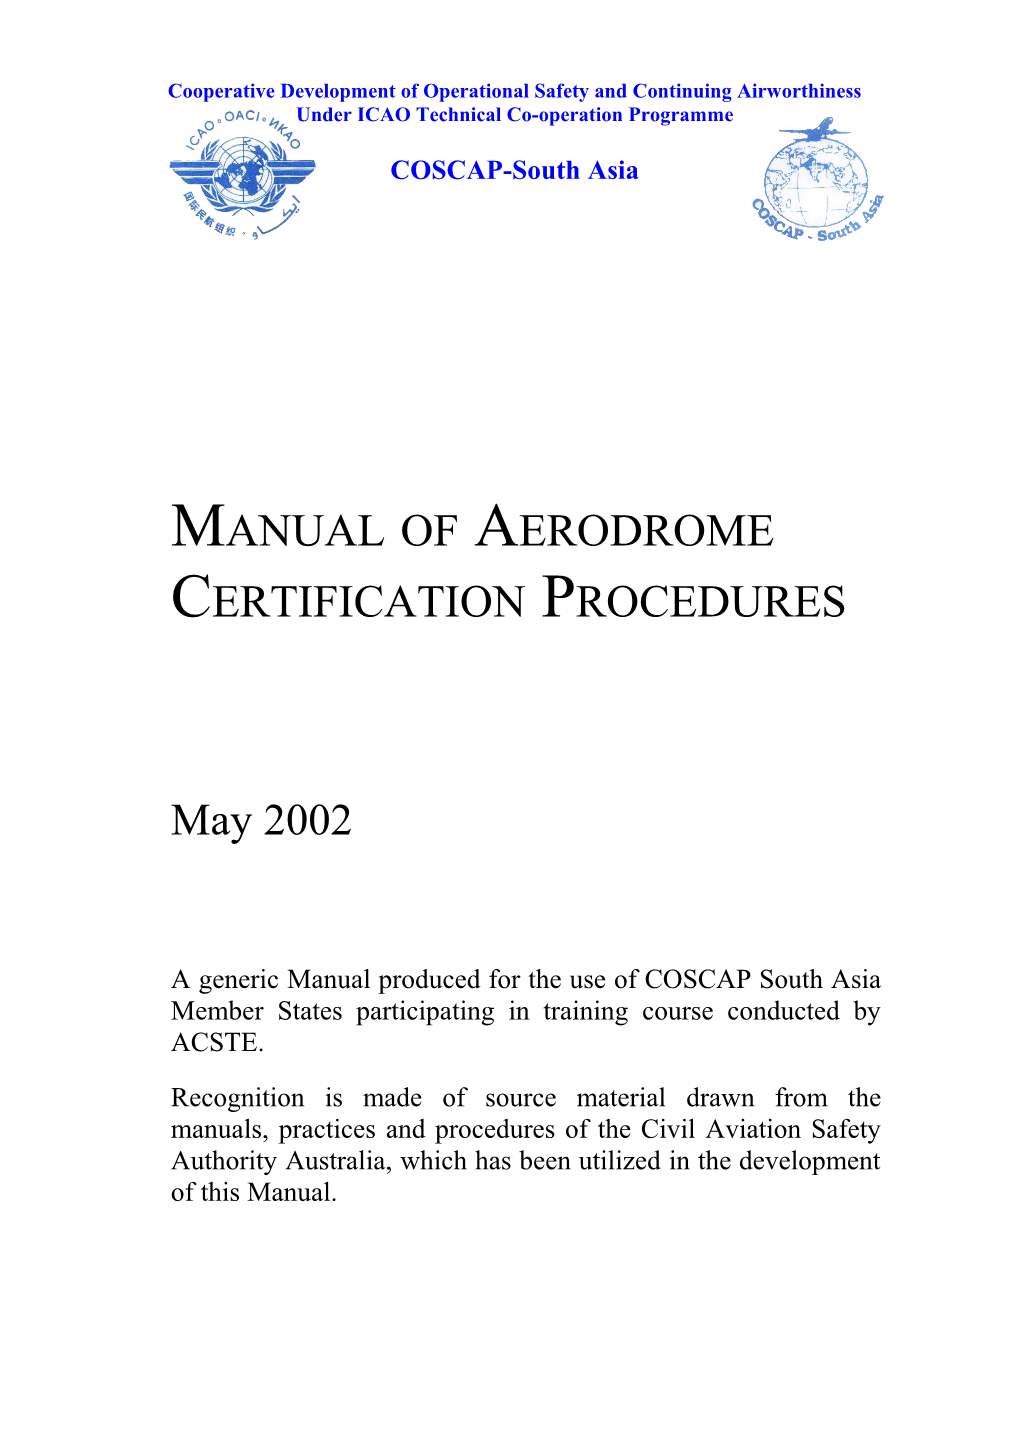 Cooperative Development of Operational Safety Continuing Airworthiness